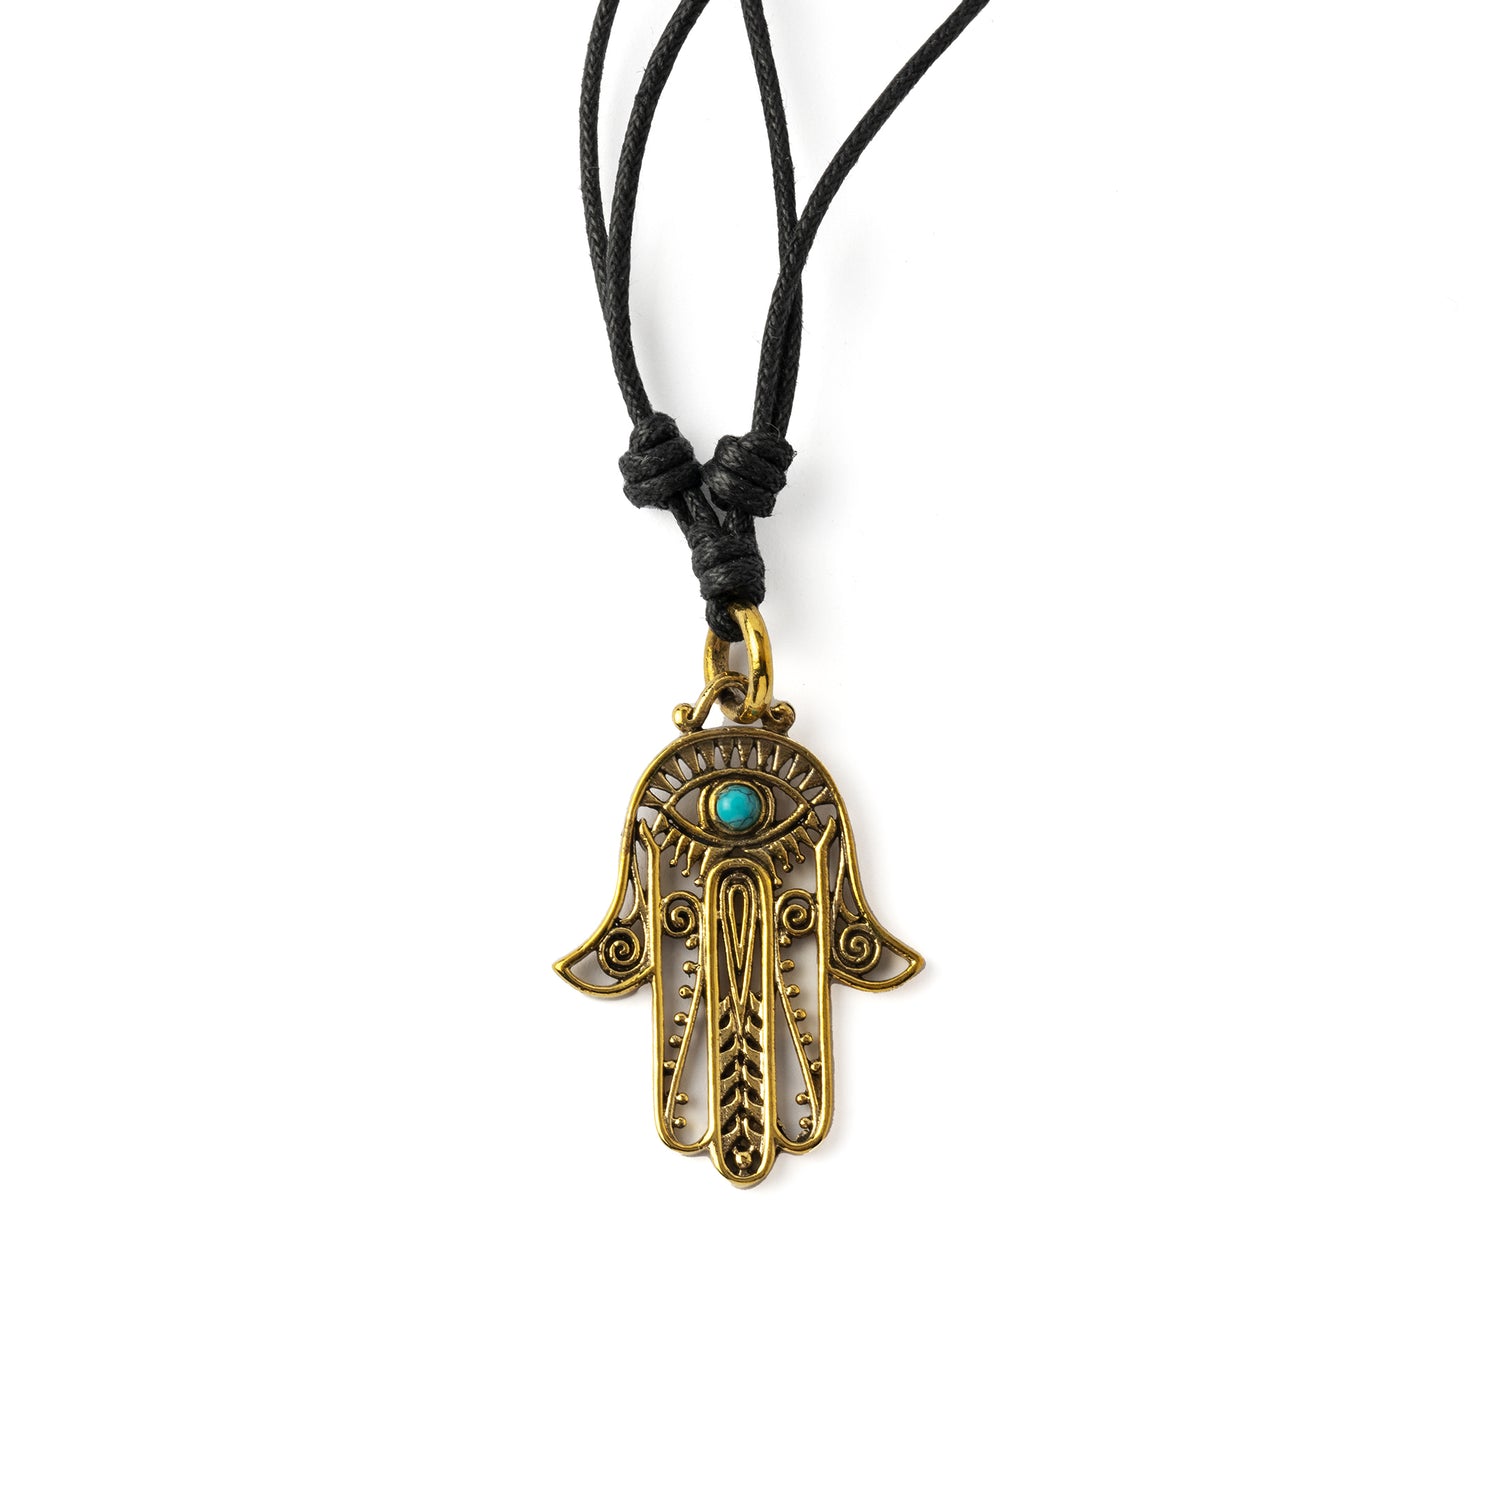 Hamsa Evil Eye Necklace on cotton string frontal view with Turquoise